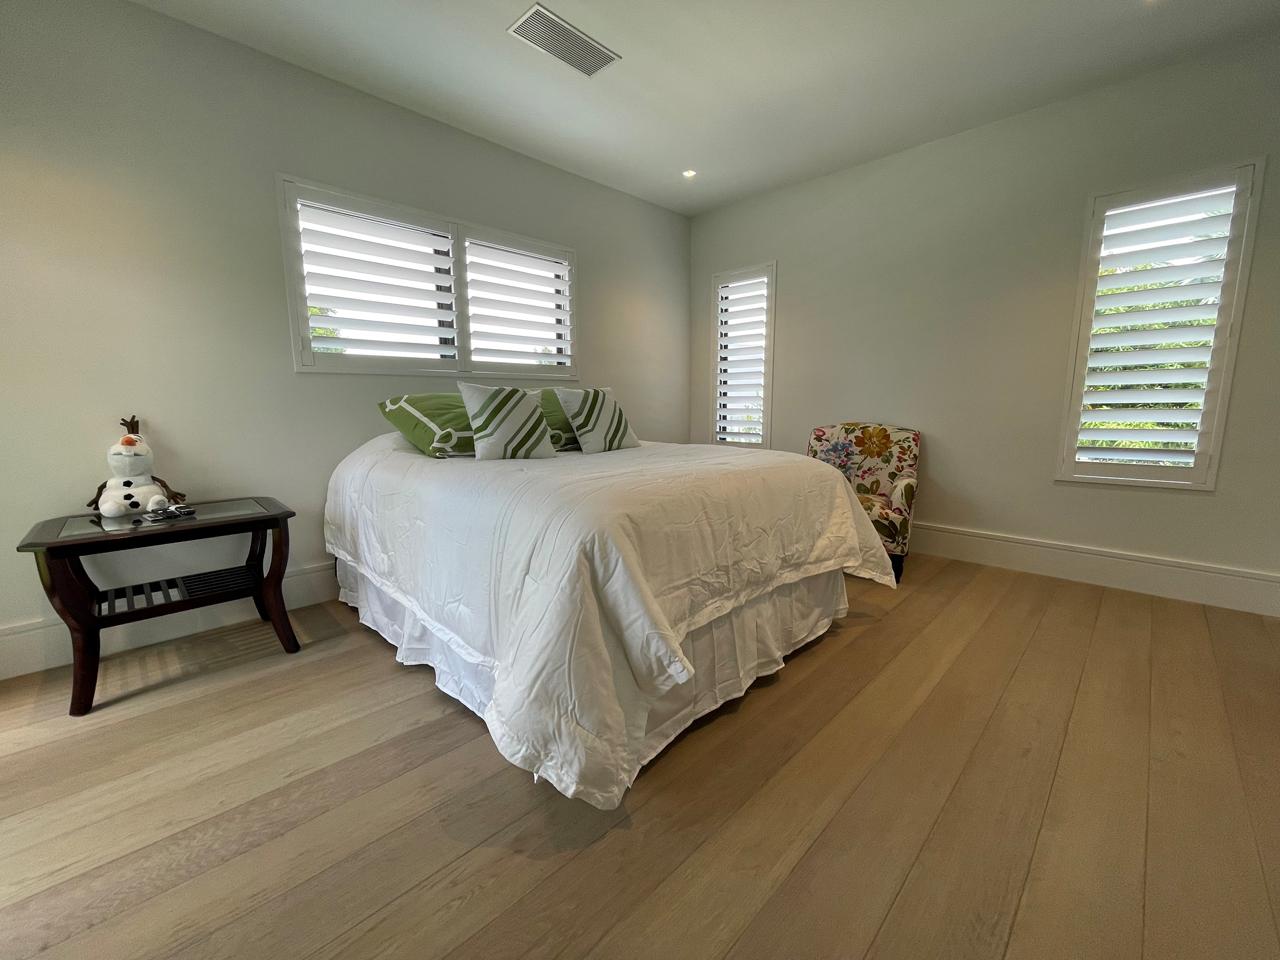 Bedroom with poly shutters